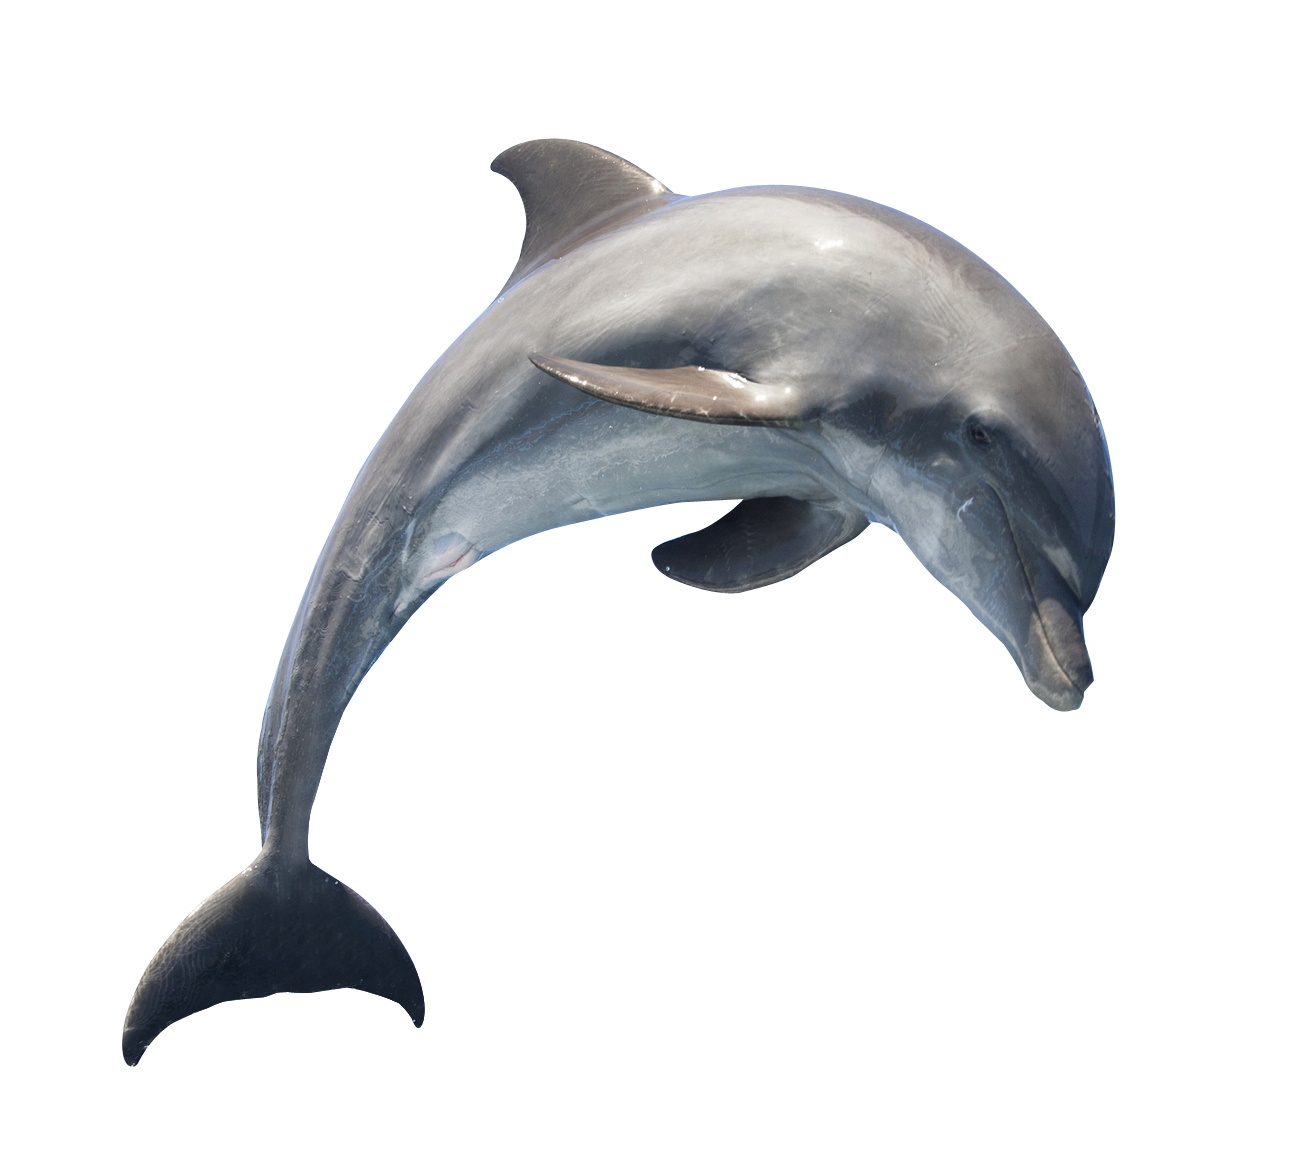 Dolphin Png Image PNG Image